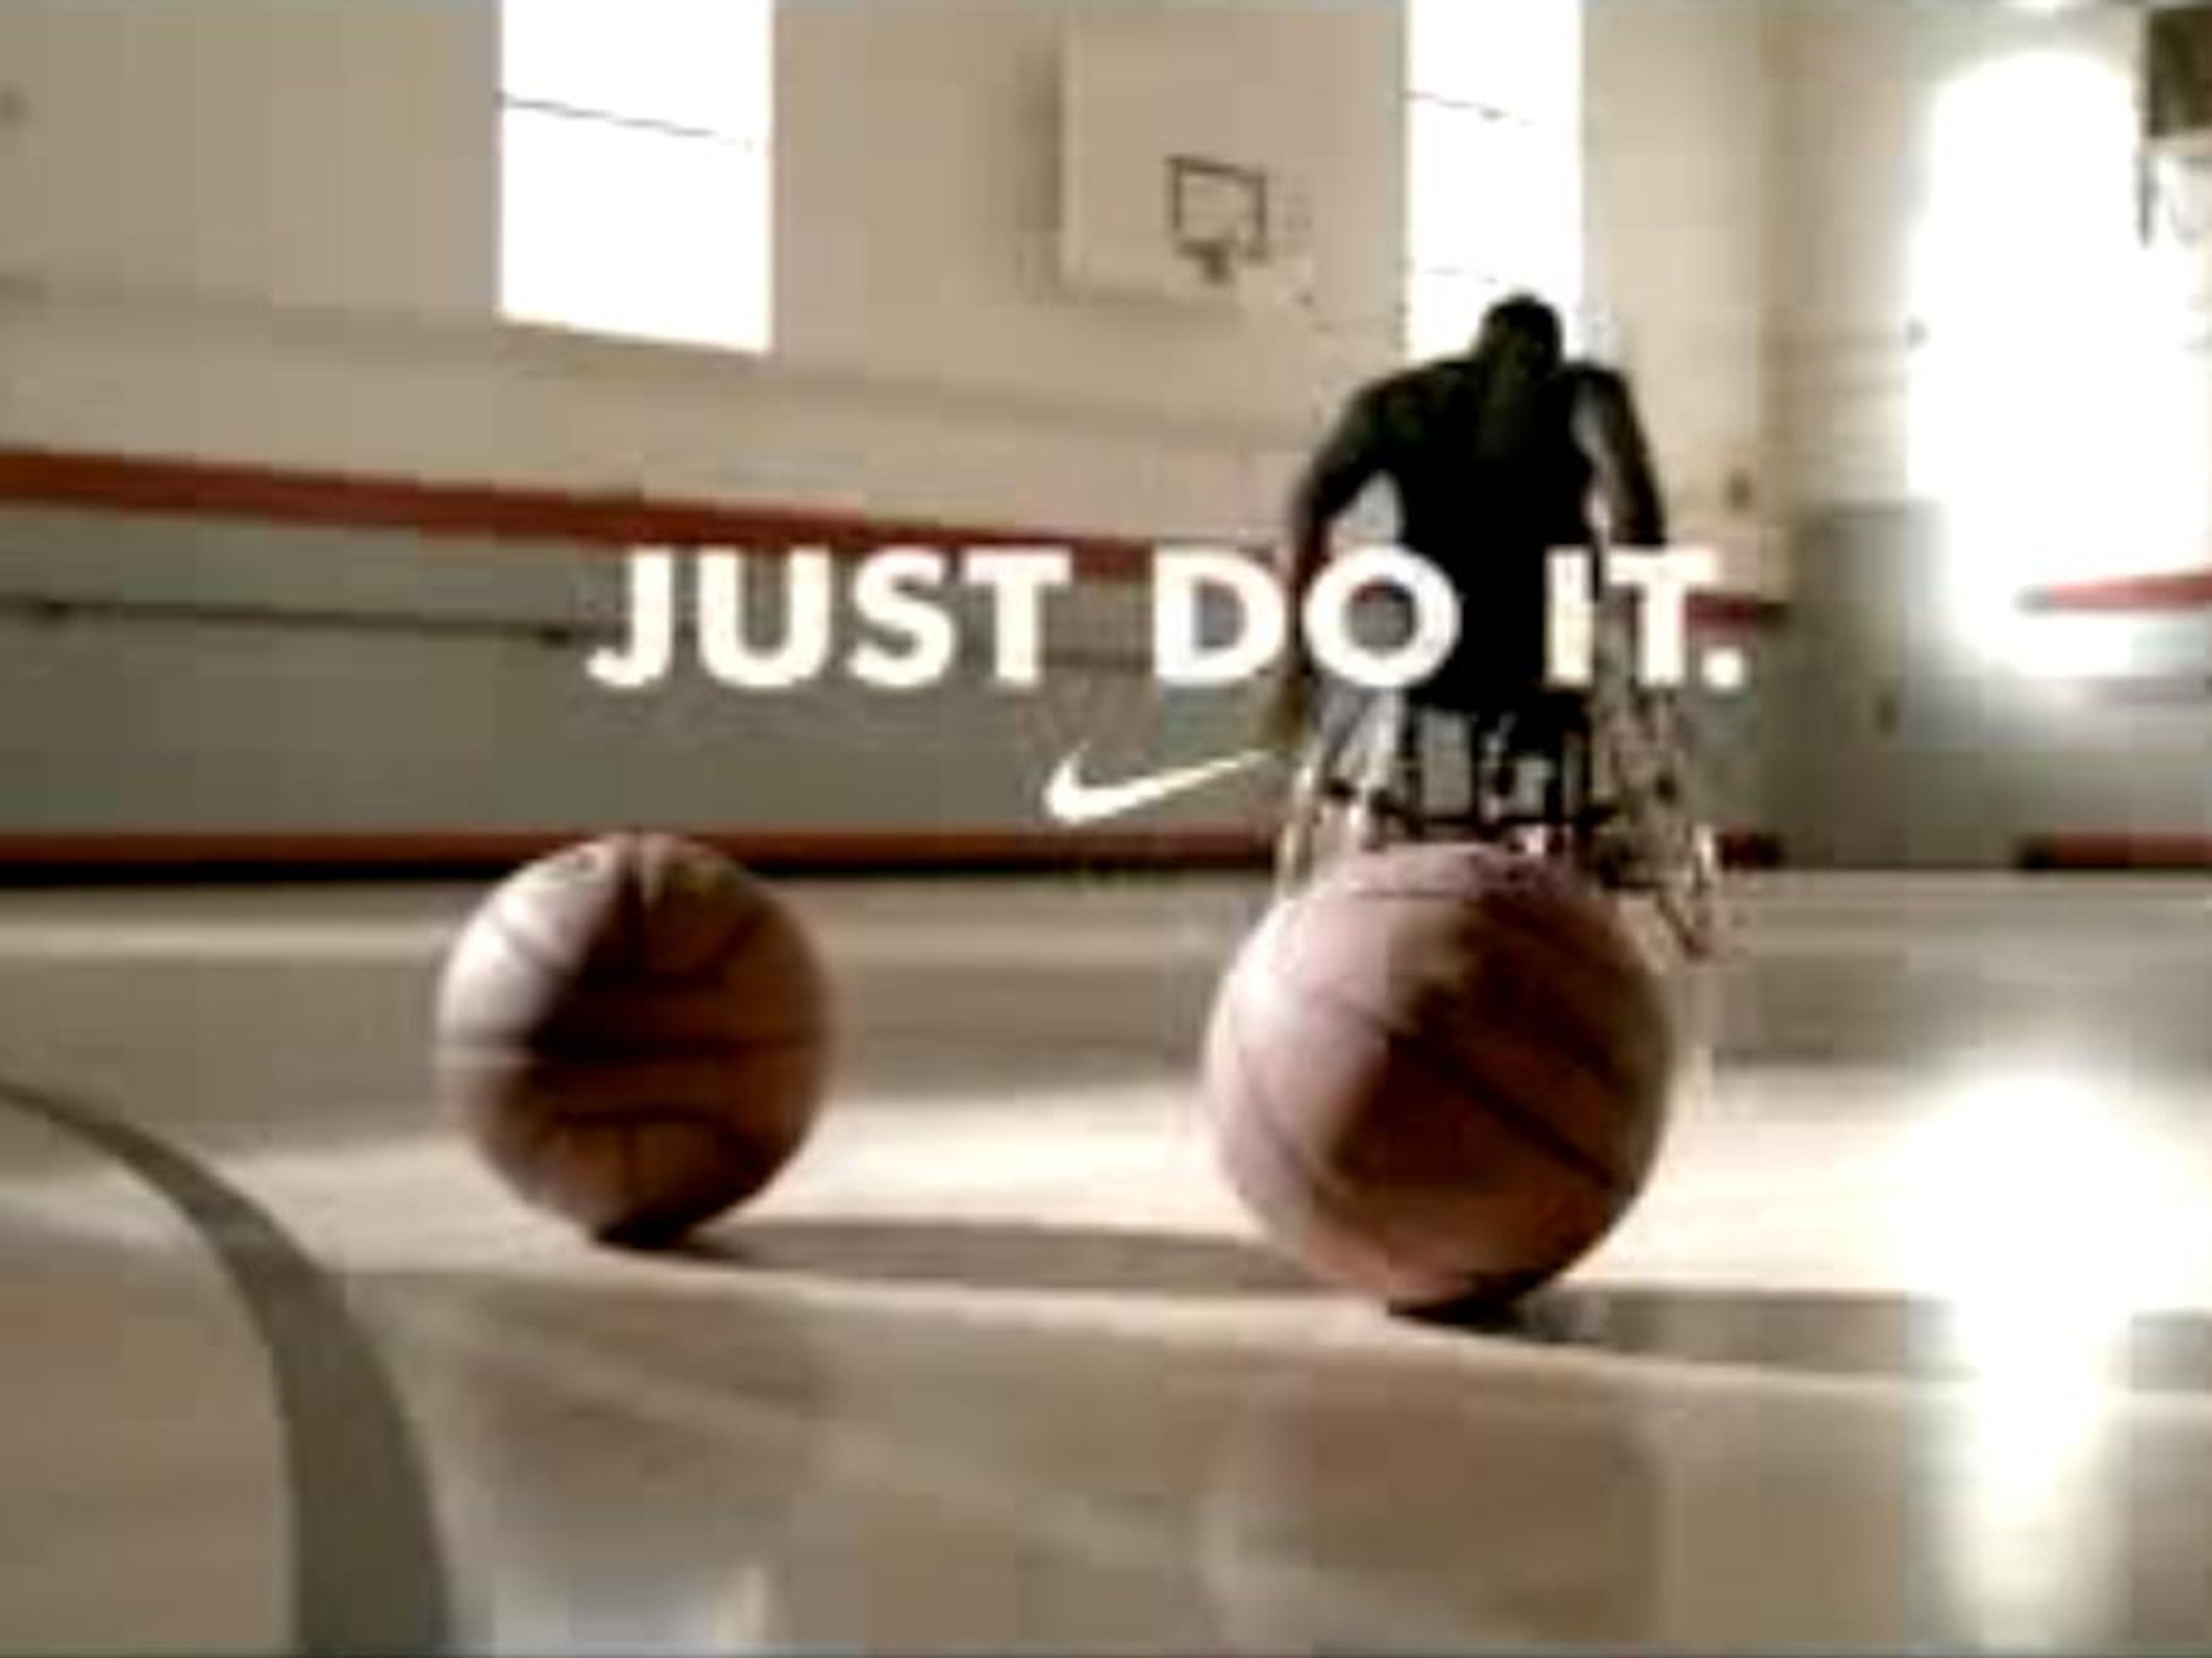 In 2007, Nike featured Matt Scott of the National Wheelchair Basketball Association in a "Just Do It" ad.